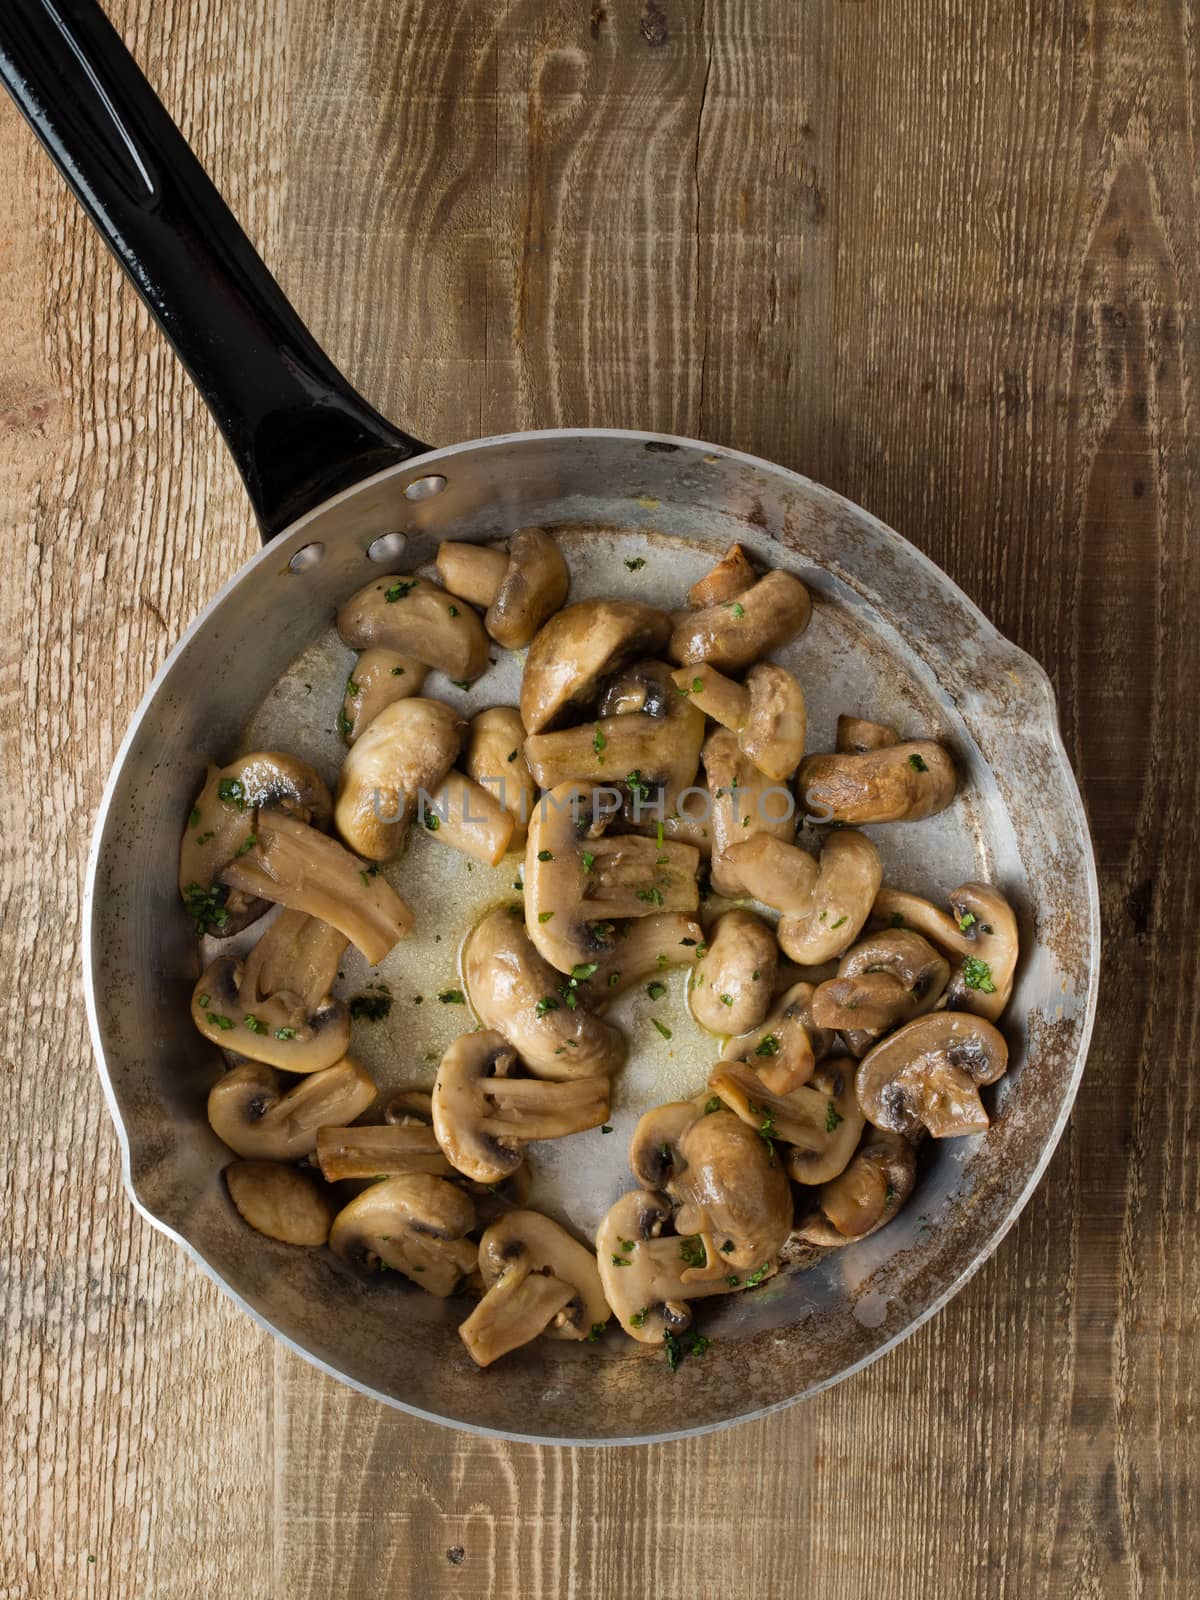 rustic sauteed mushrooms by zkruger